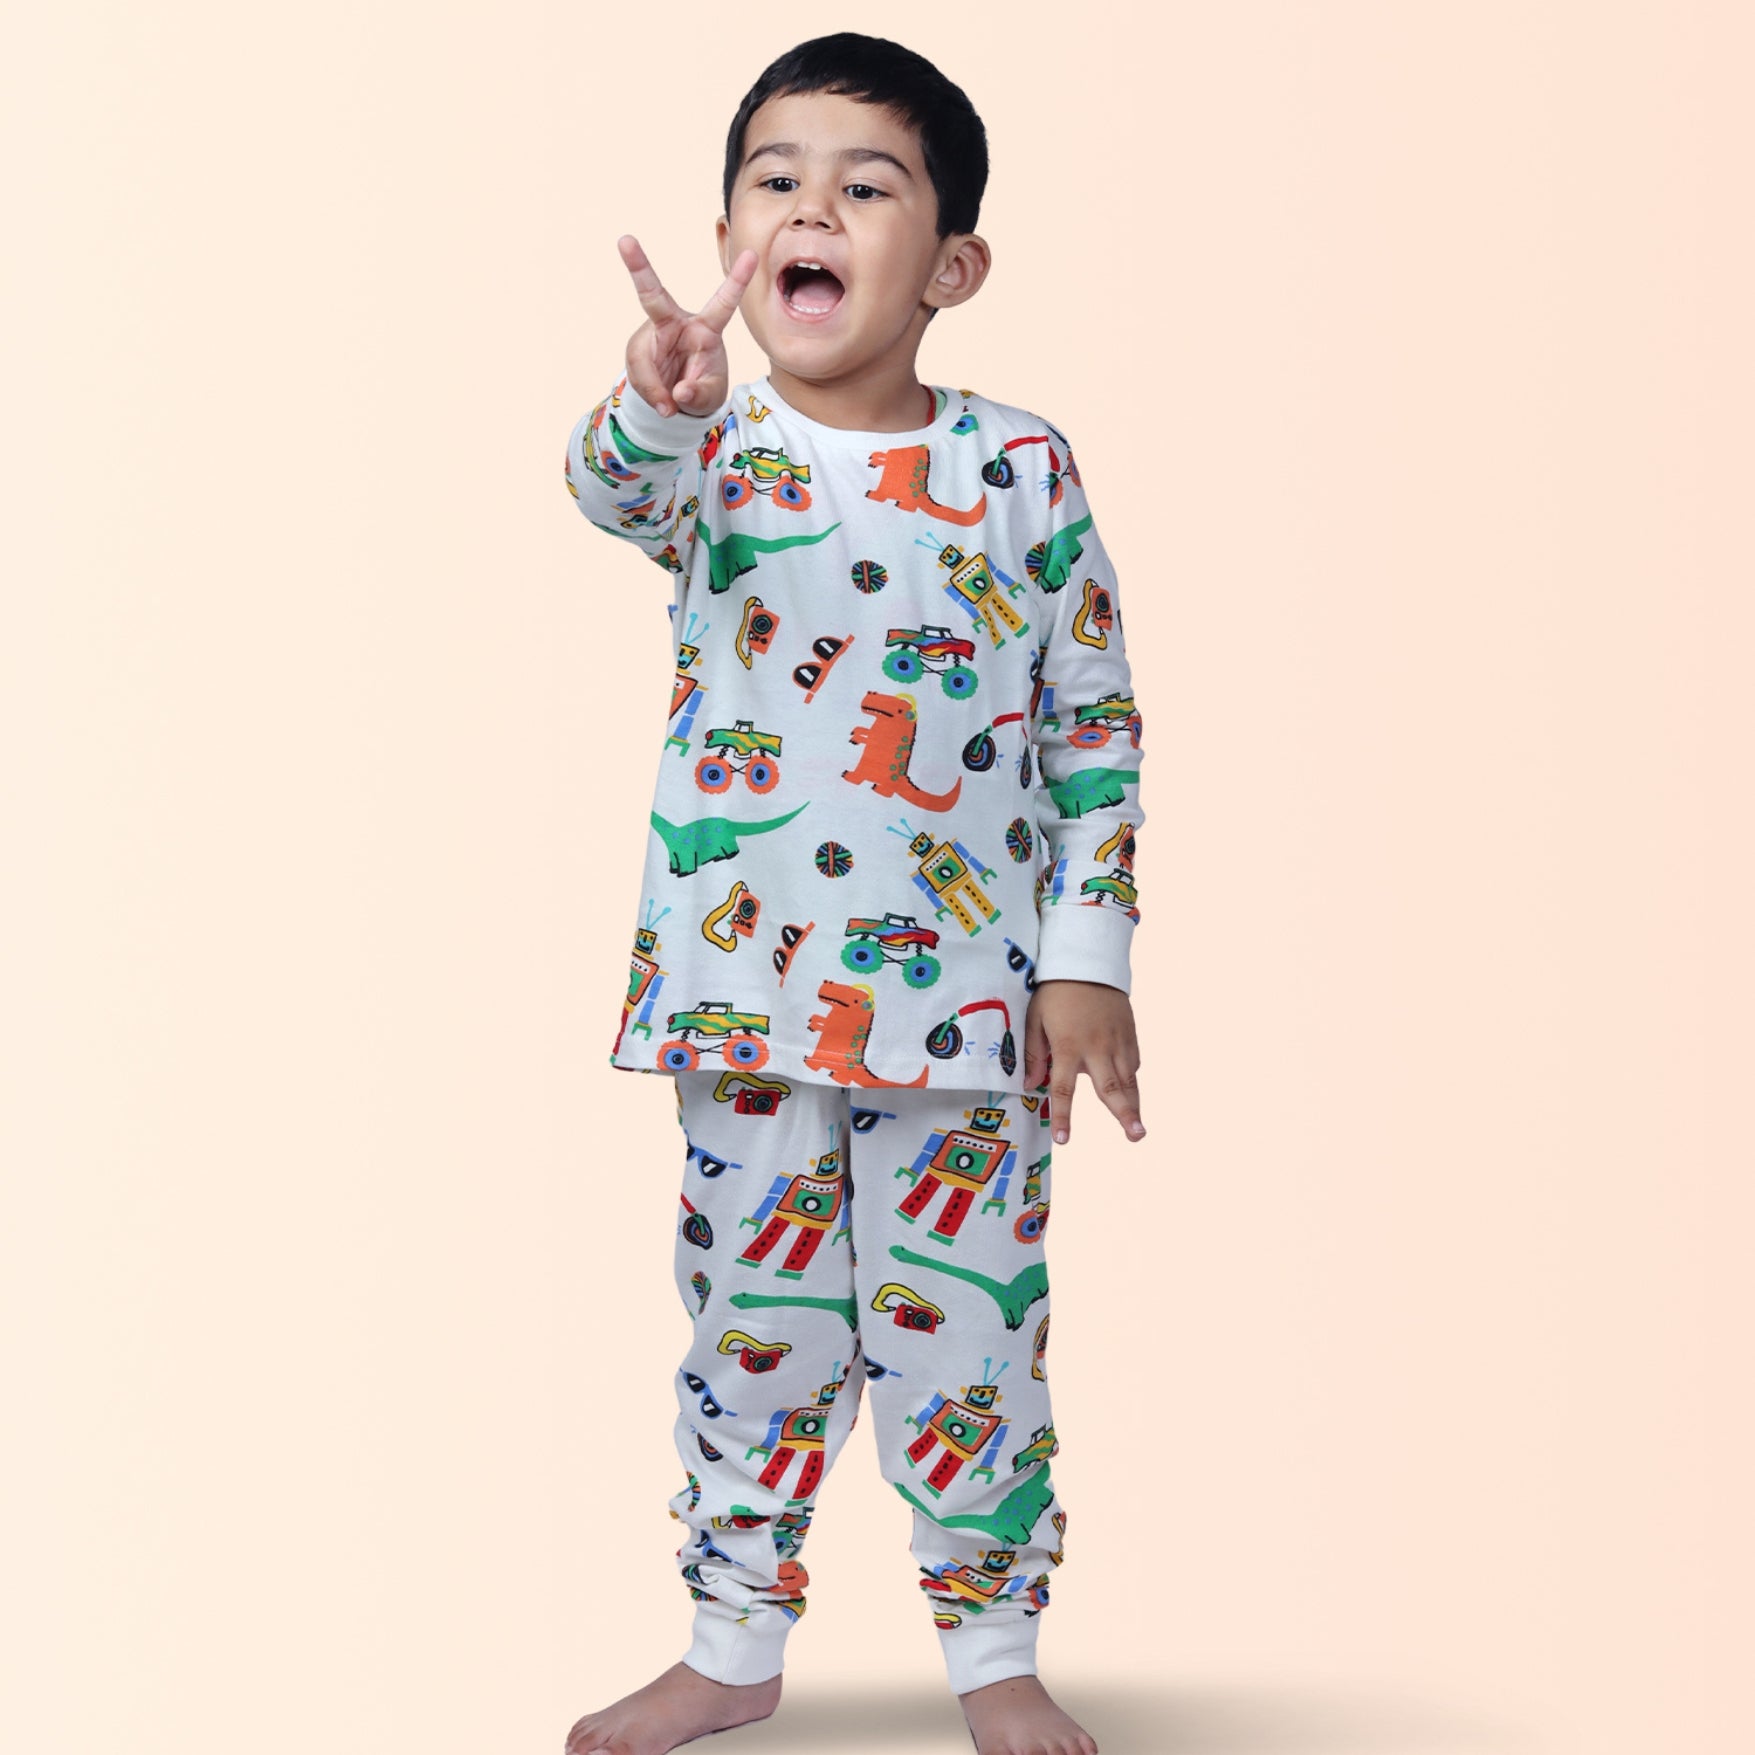 Full Sleeve Night Suit For Boy In White Colour - Robots & Toys